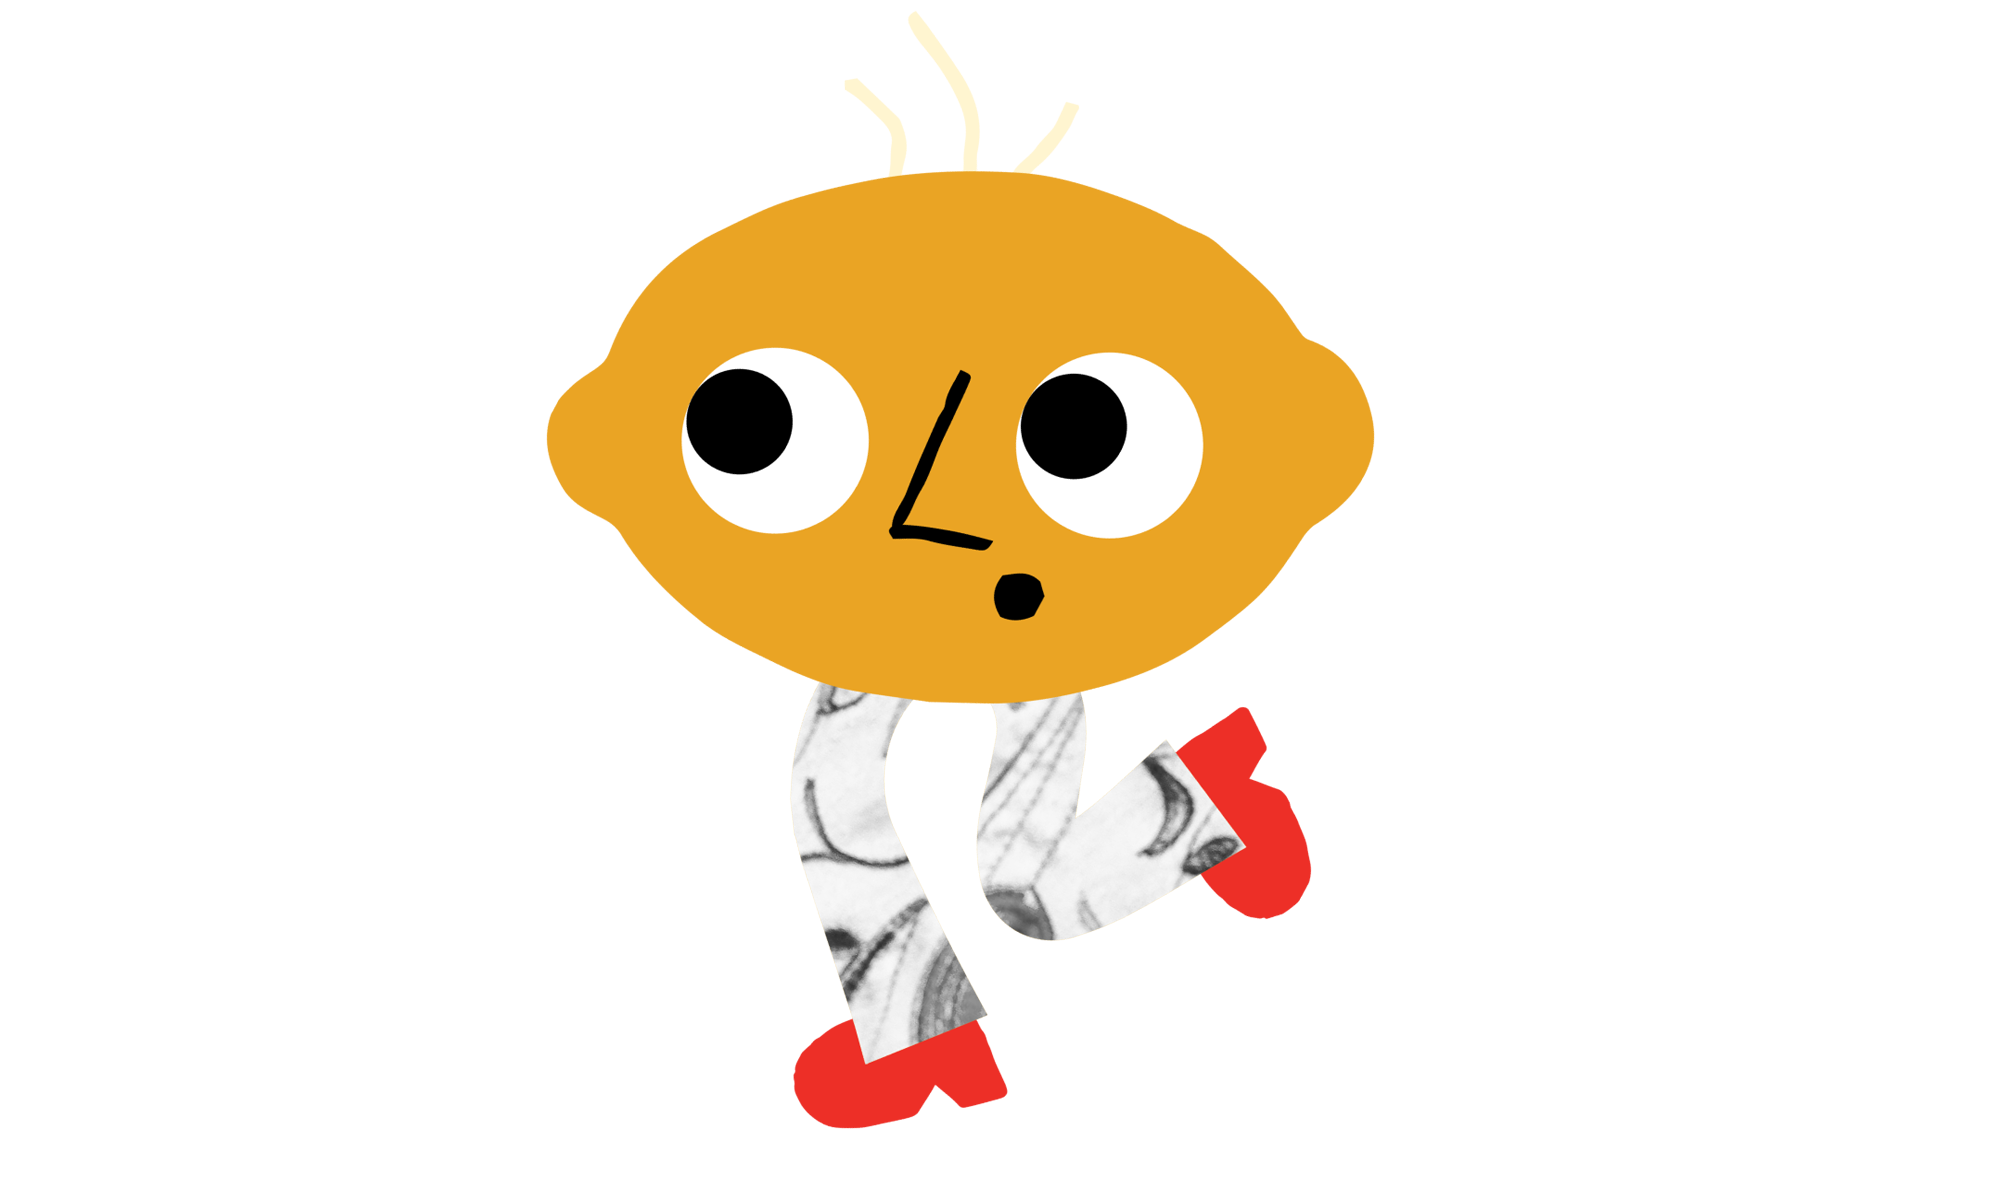 Cute lemon graphic character. Lemon character has a surprised look on their face, three yellow hairs, and is wearing pants and red shoes.